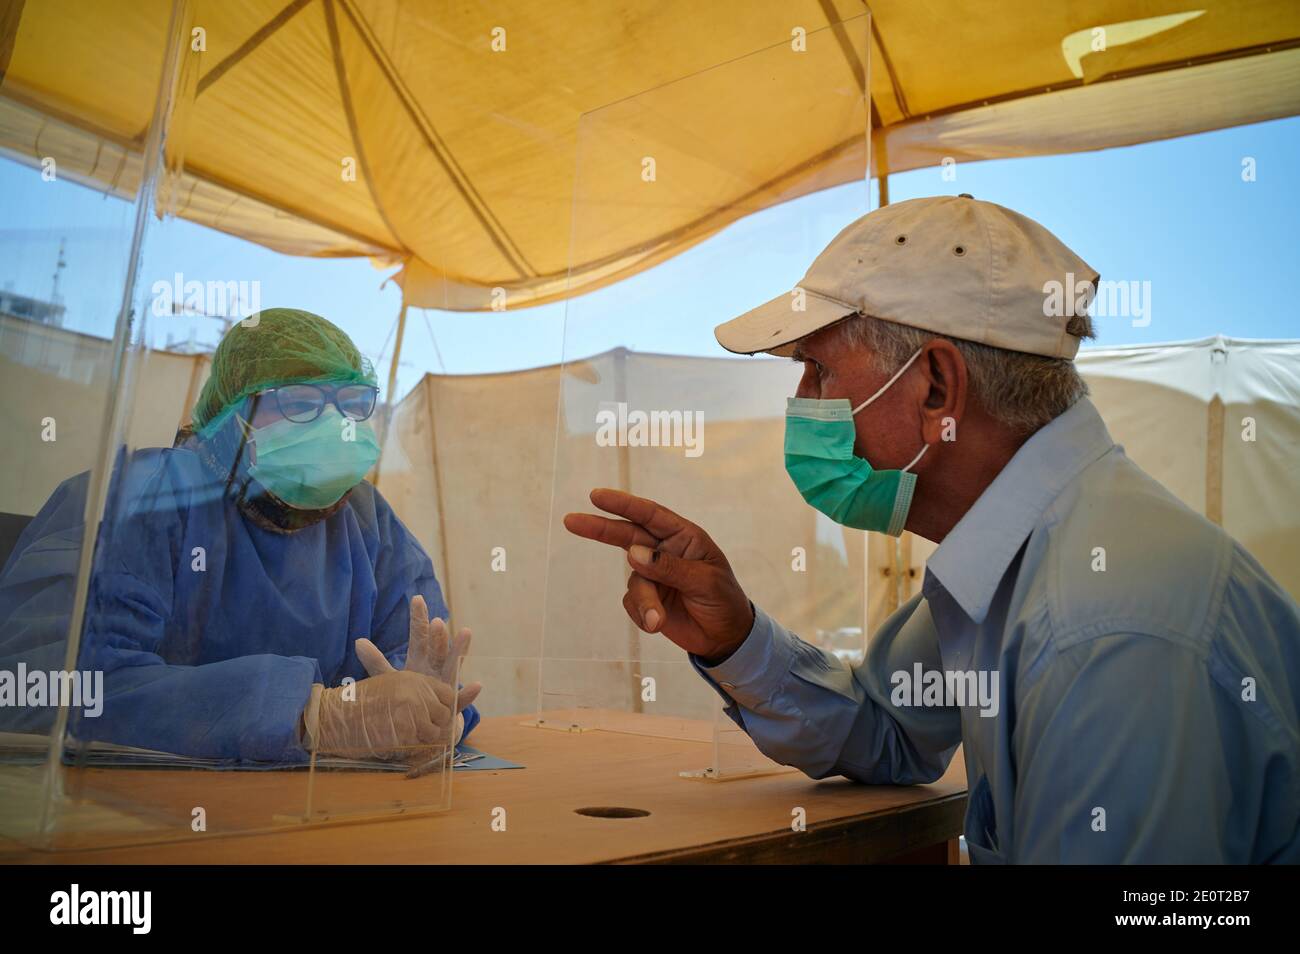 A health worker dressed in full PPE sits behind a flexi glass shield and counsels a TB client for a coronavirus test, at the Gori TB Clinic at the Indus Hospital in Korangi, Karachi, Pakistan. Stock Photo